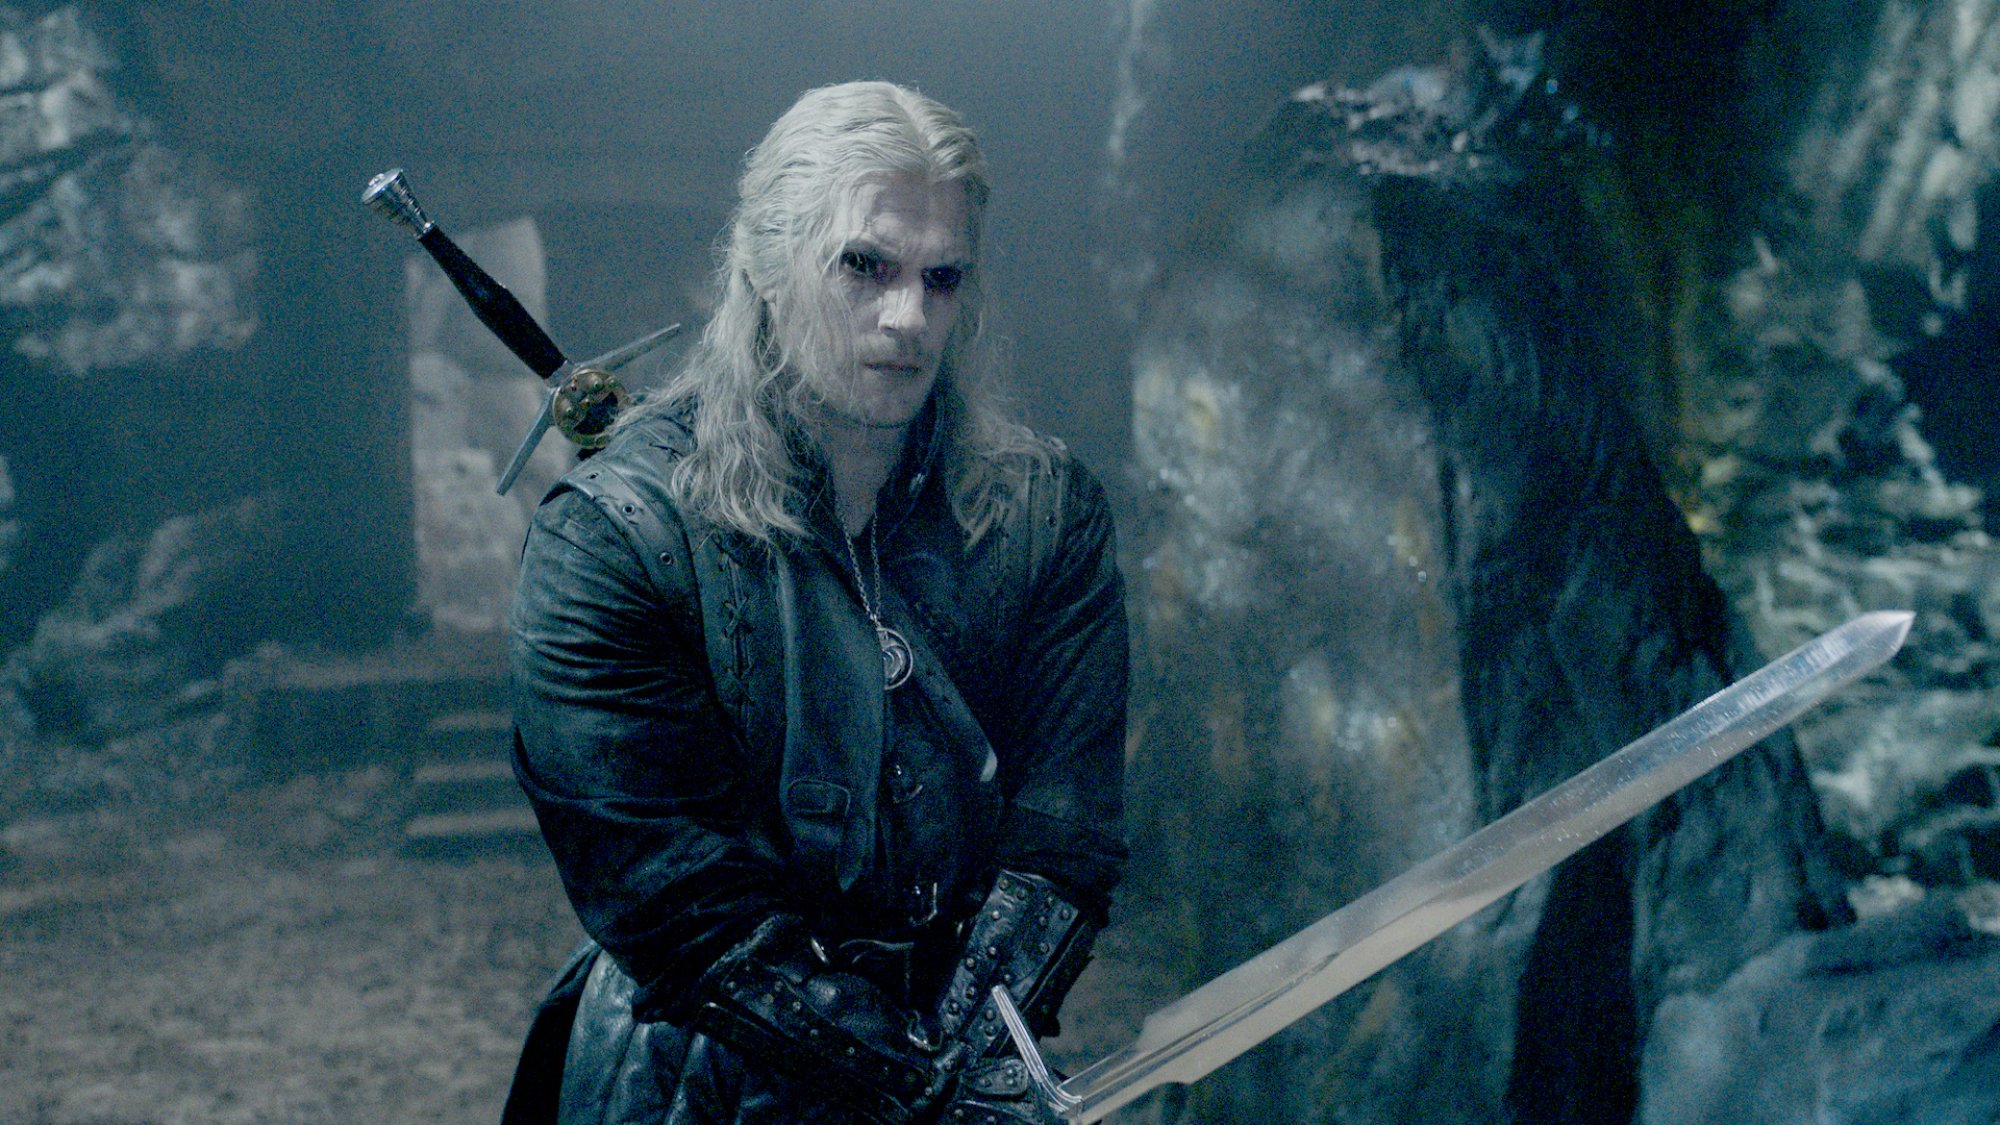 Henry Cavill in "The Witcher" as Geralt of Rivia, ready for combat.